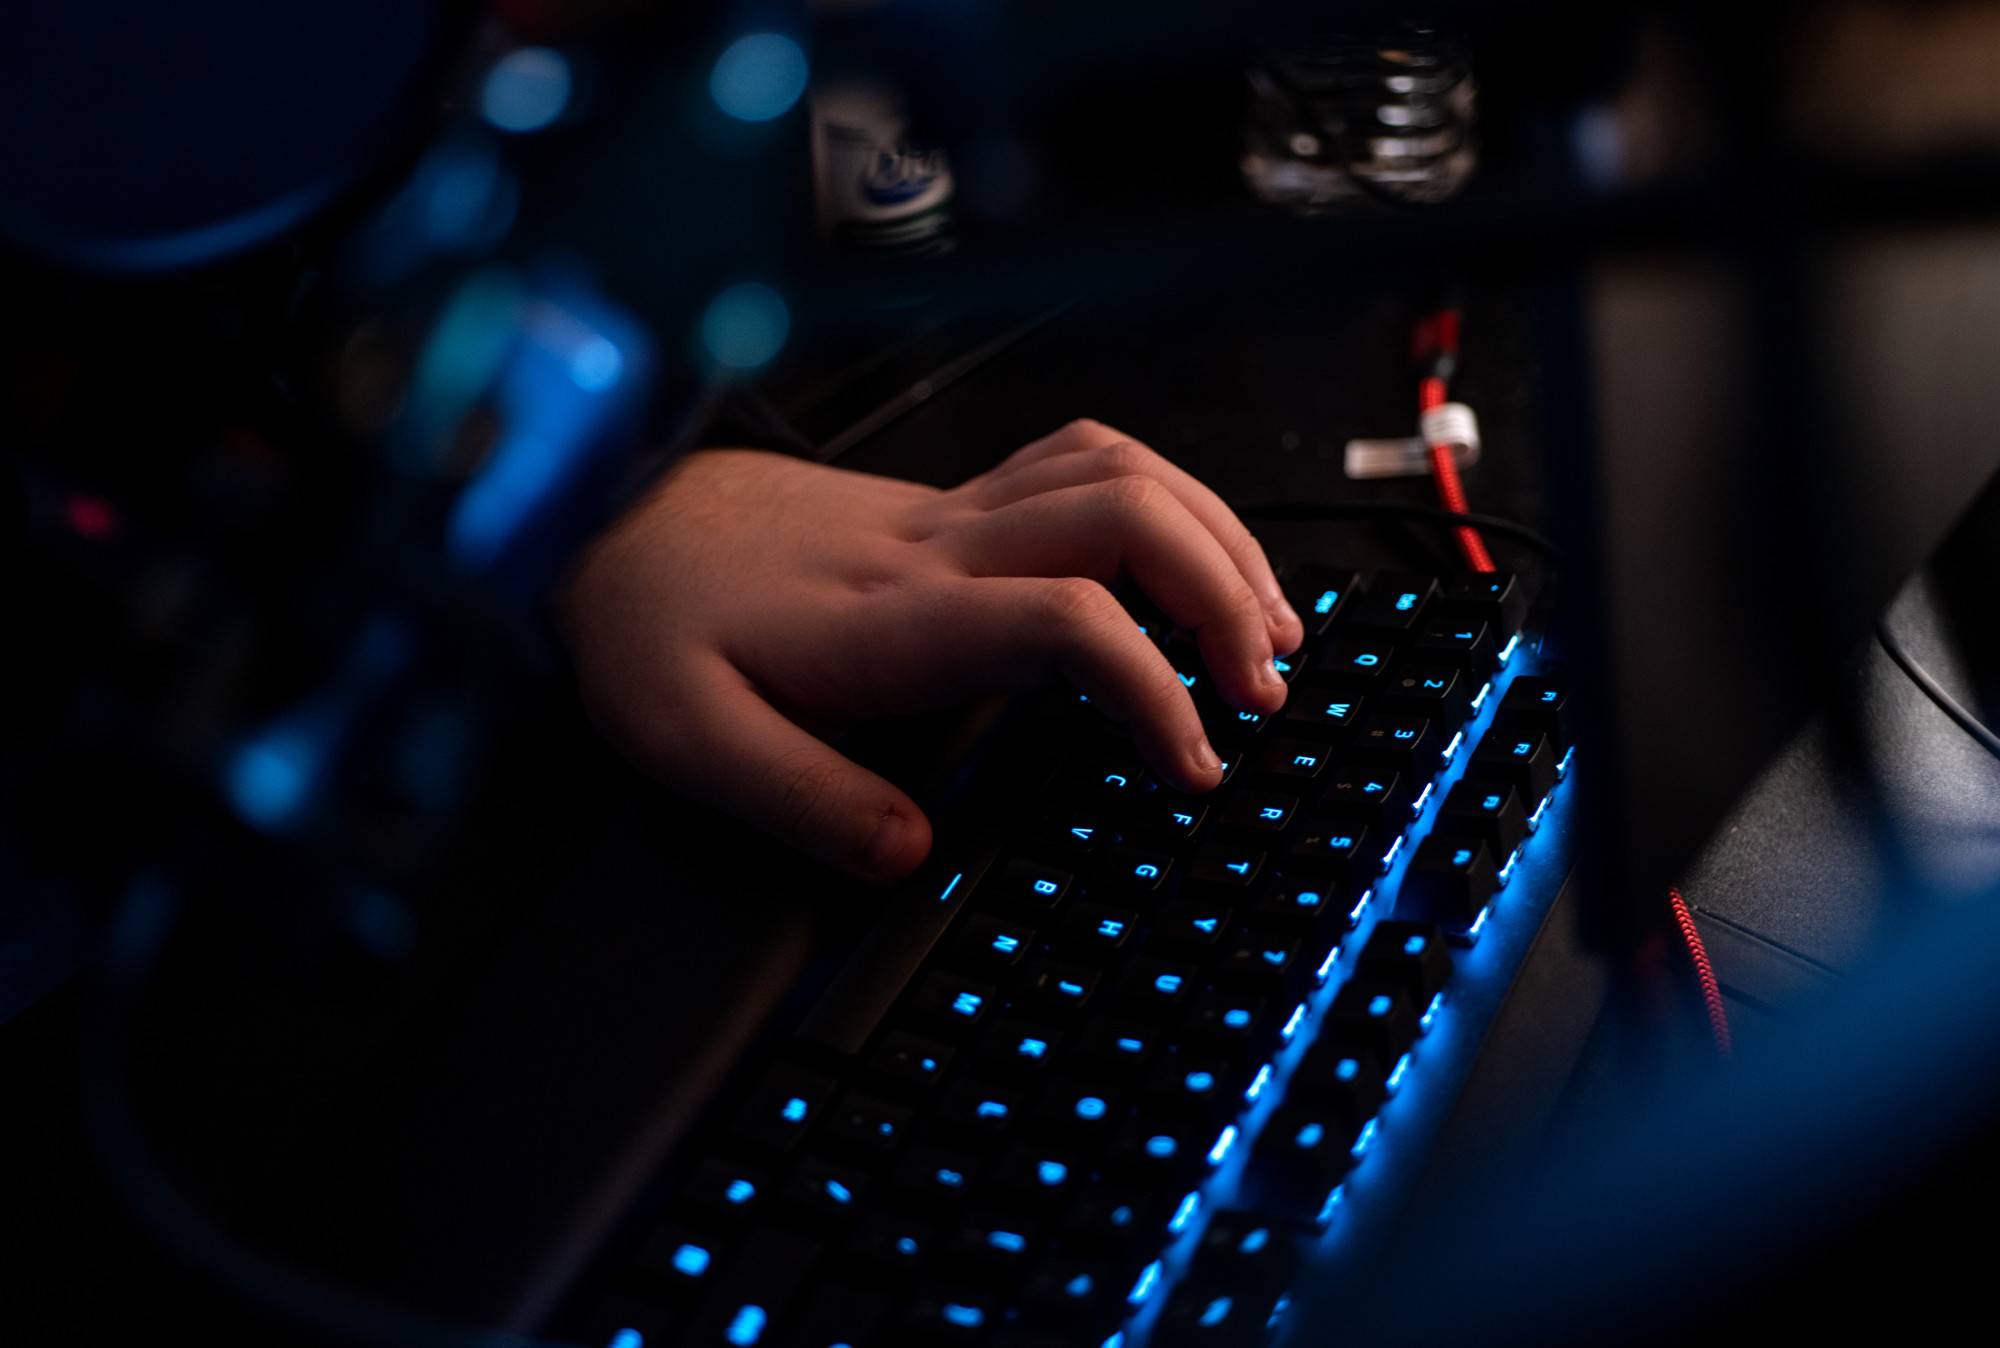 Hands over a keyboard with keys lit up